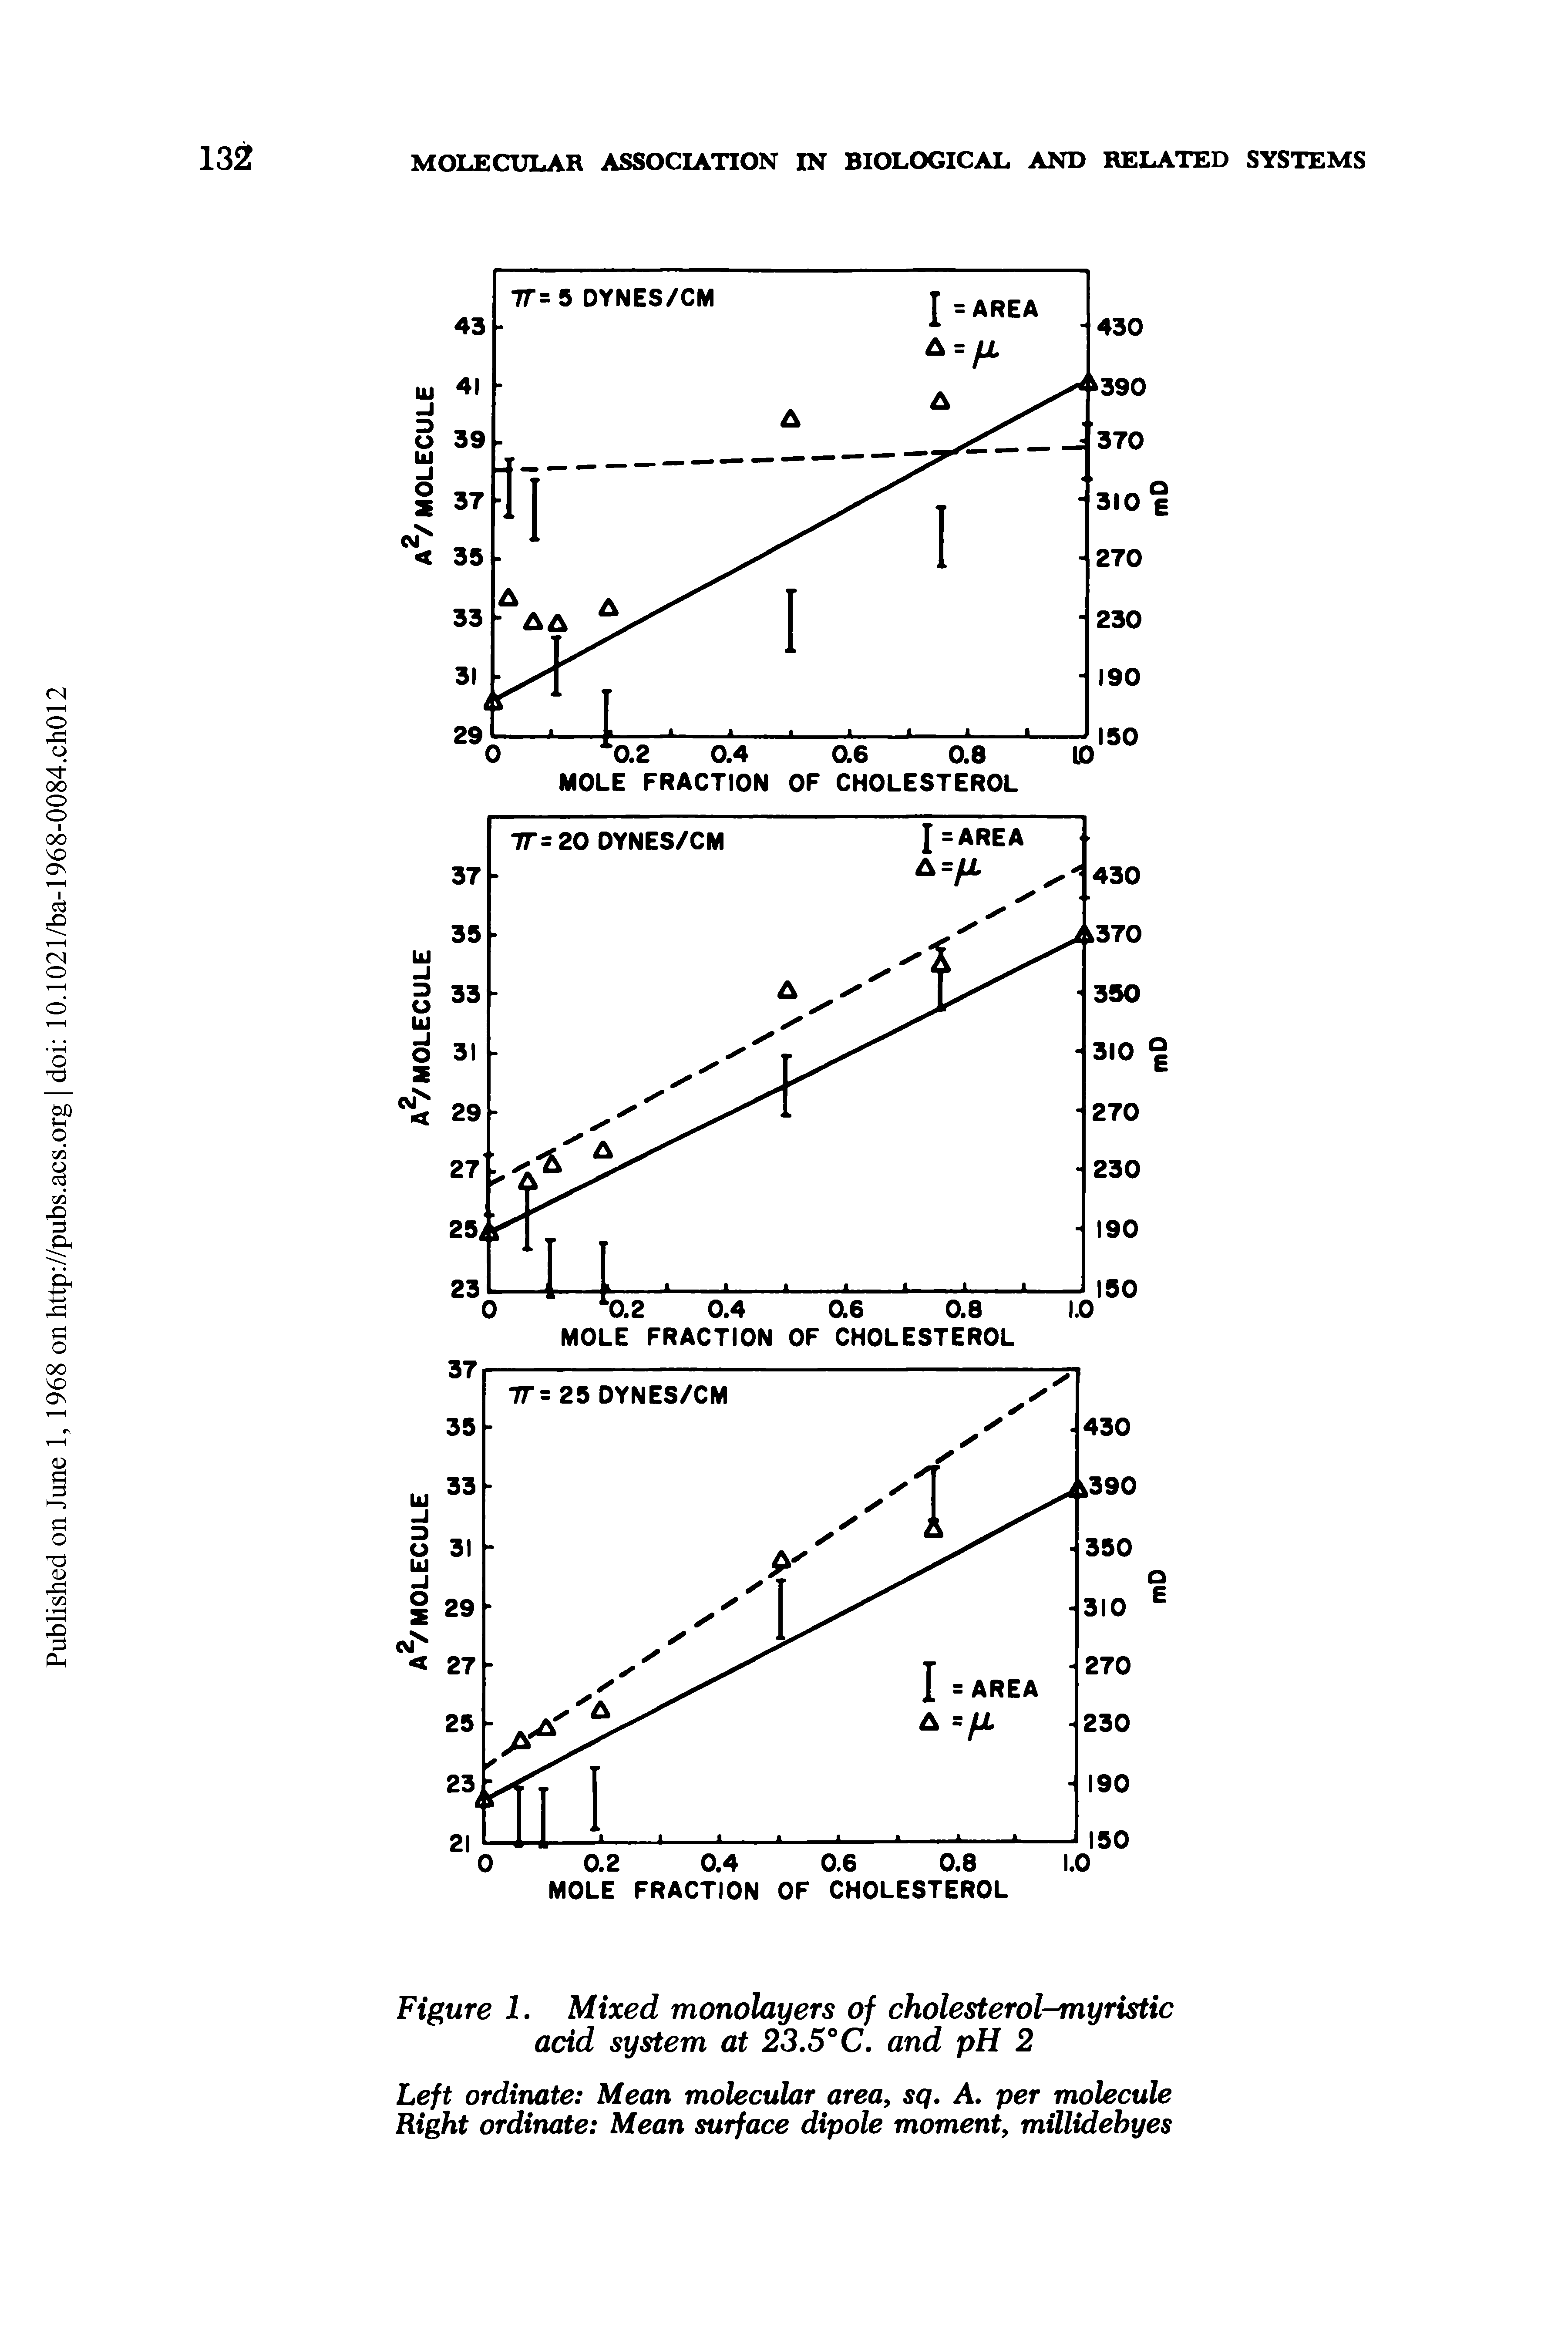 Figure 1. Mixed monolayers of cholesterol- myristic acid system at 23.5°C. and pH 2...